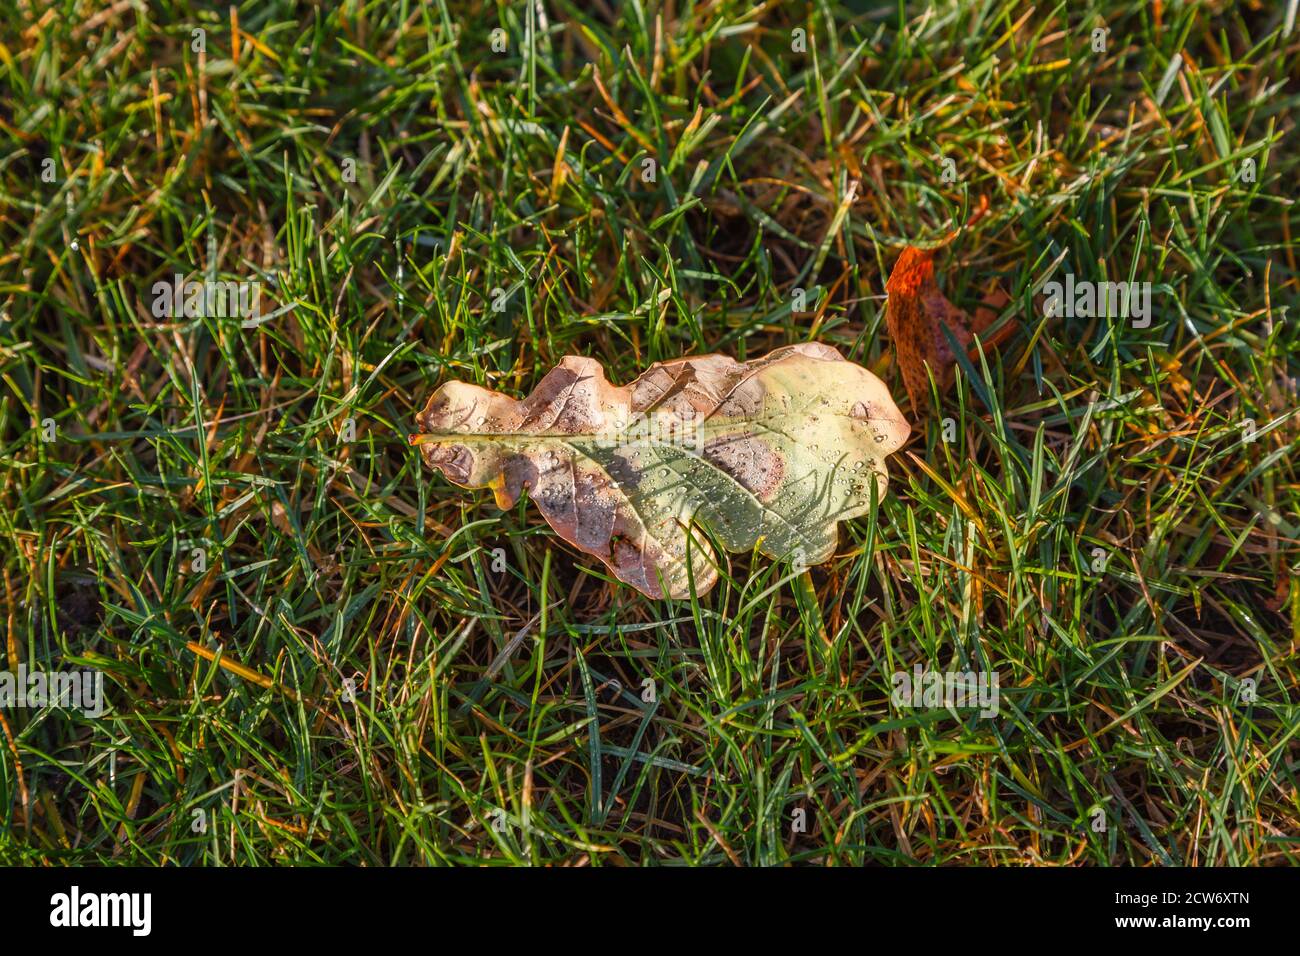 A single fallen leaf from an oak tree (Quercus robur) covered in water droplets laying on grass on a lawn in winter Stock Photo